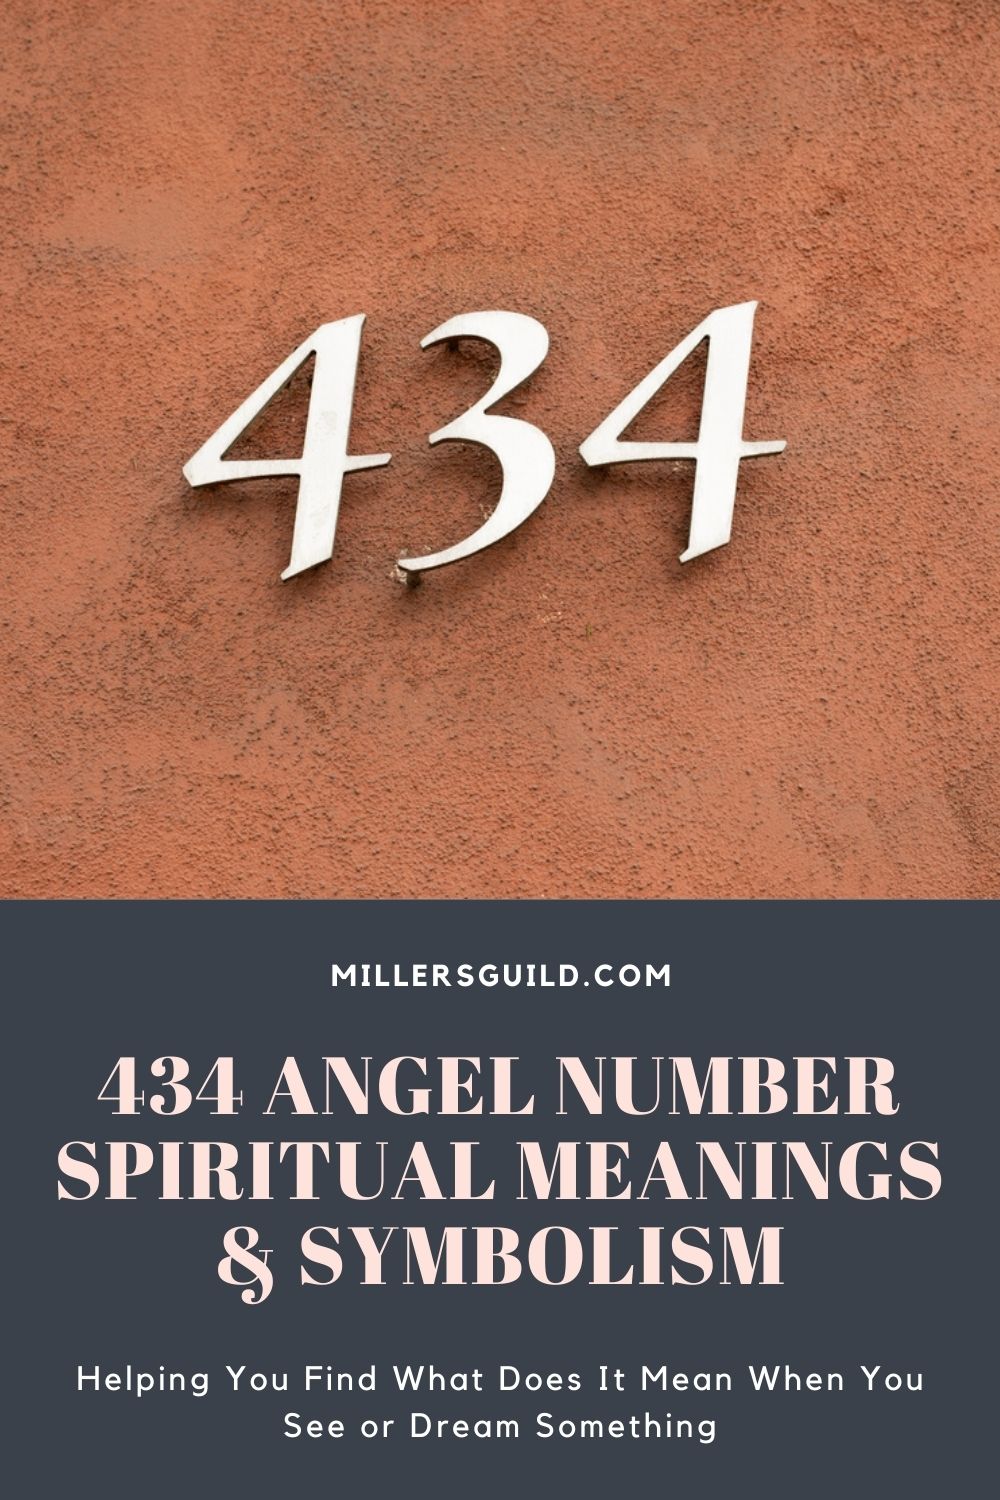 434 Angel Number Spiritual Meanings & Symbolism 2